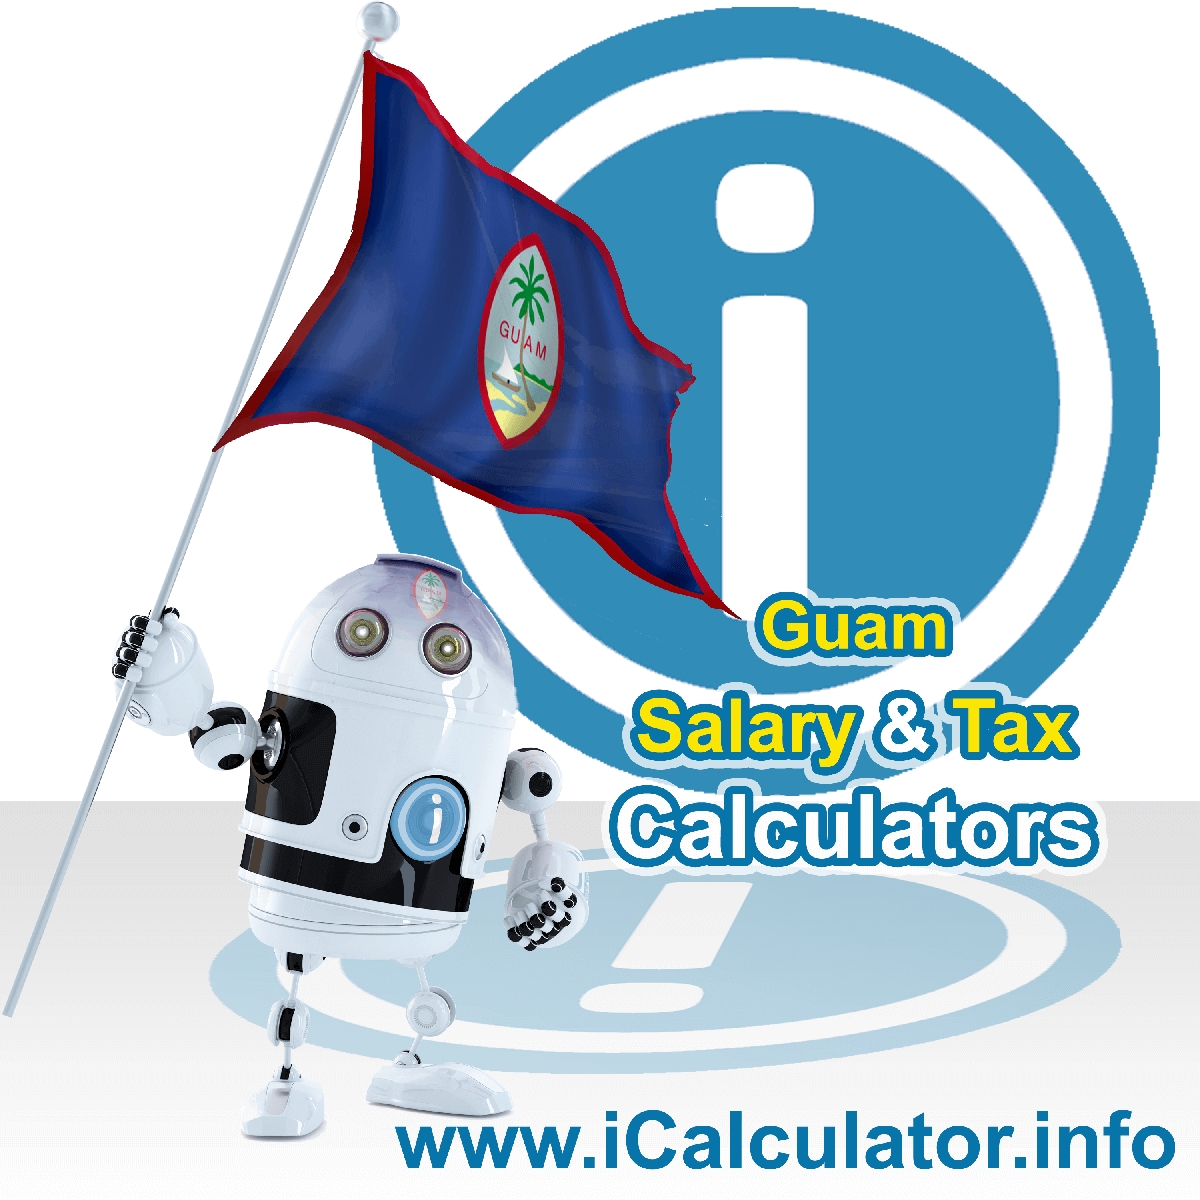 Guam Tax Calculator. This image shows the Guam flag and information relating to the tax formula for the Guam Salary Calculator